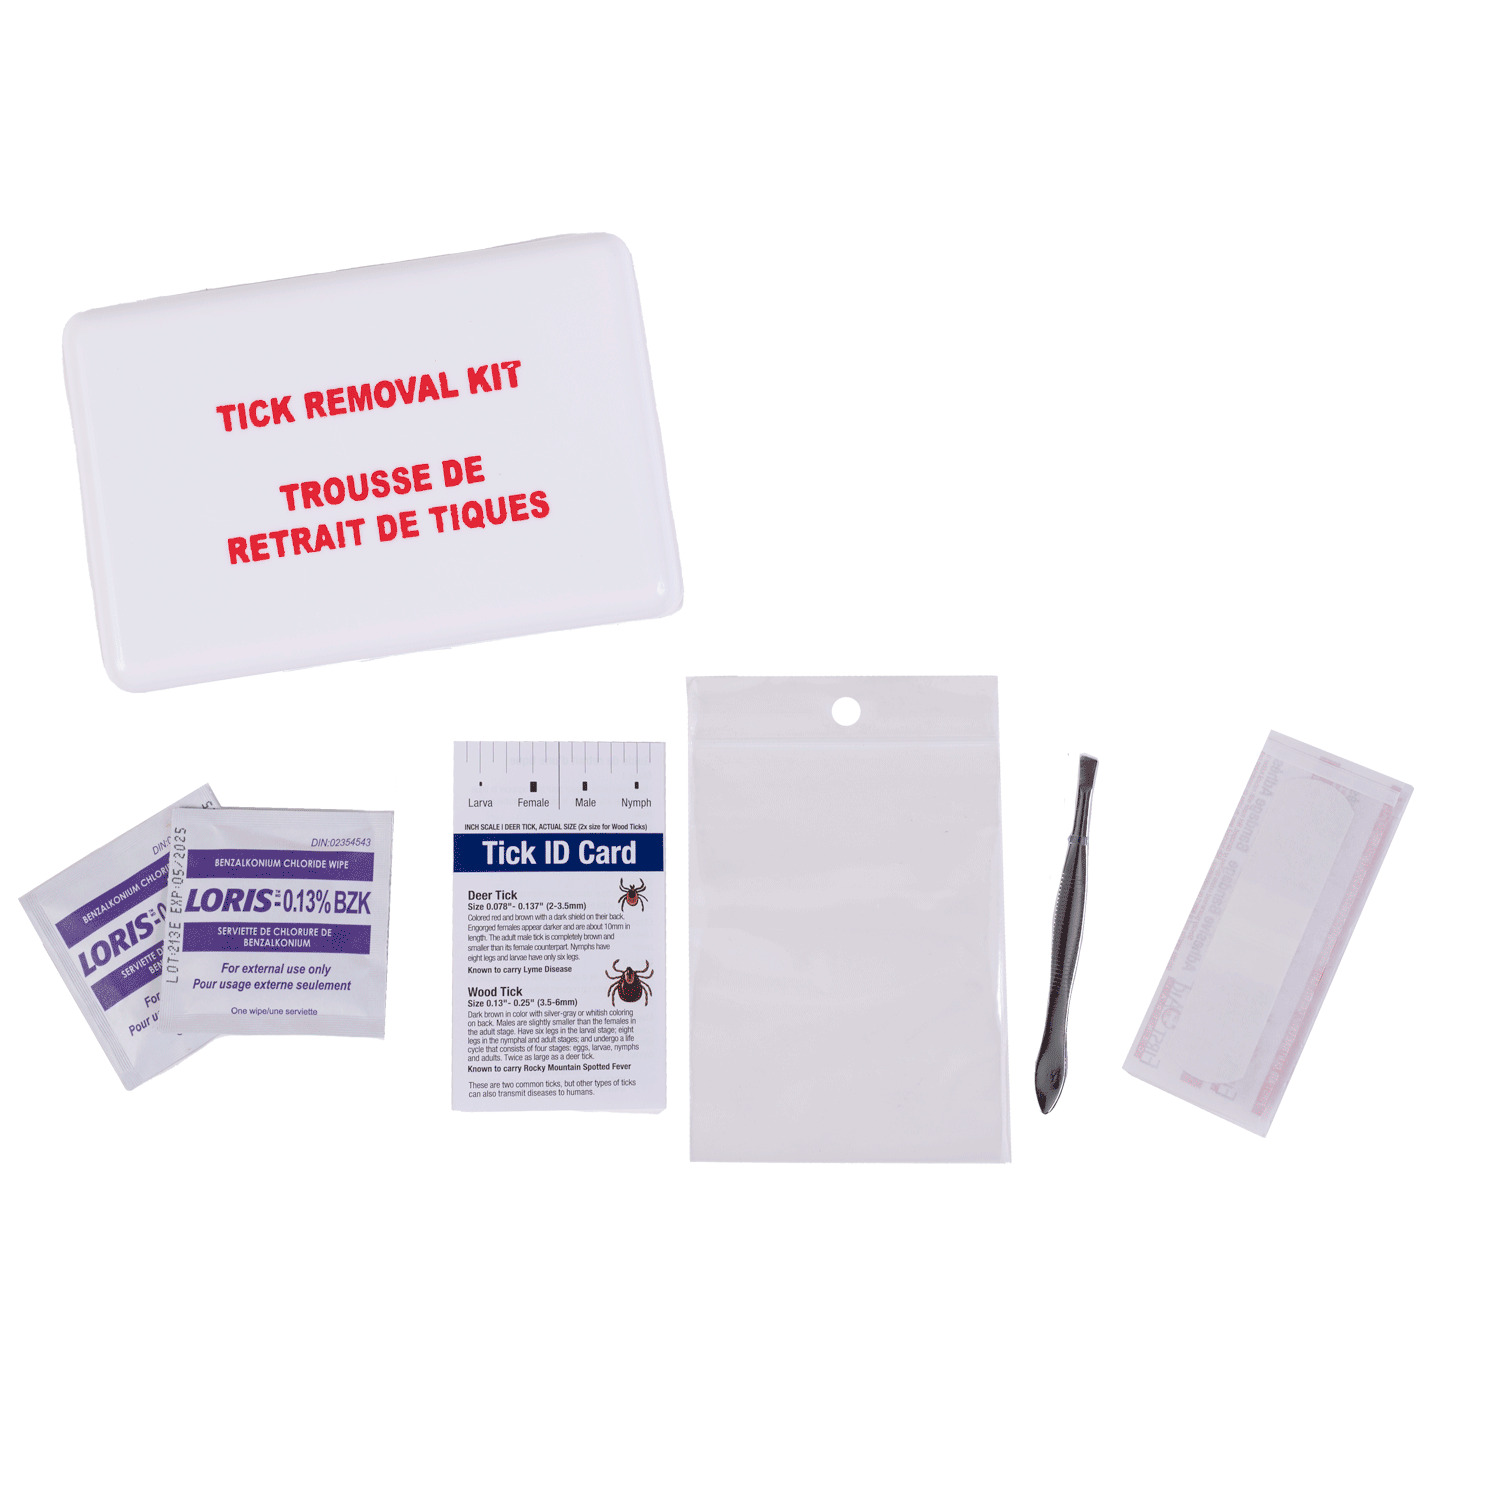 First Aid Central - Tick removal kit